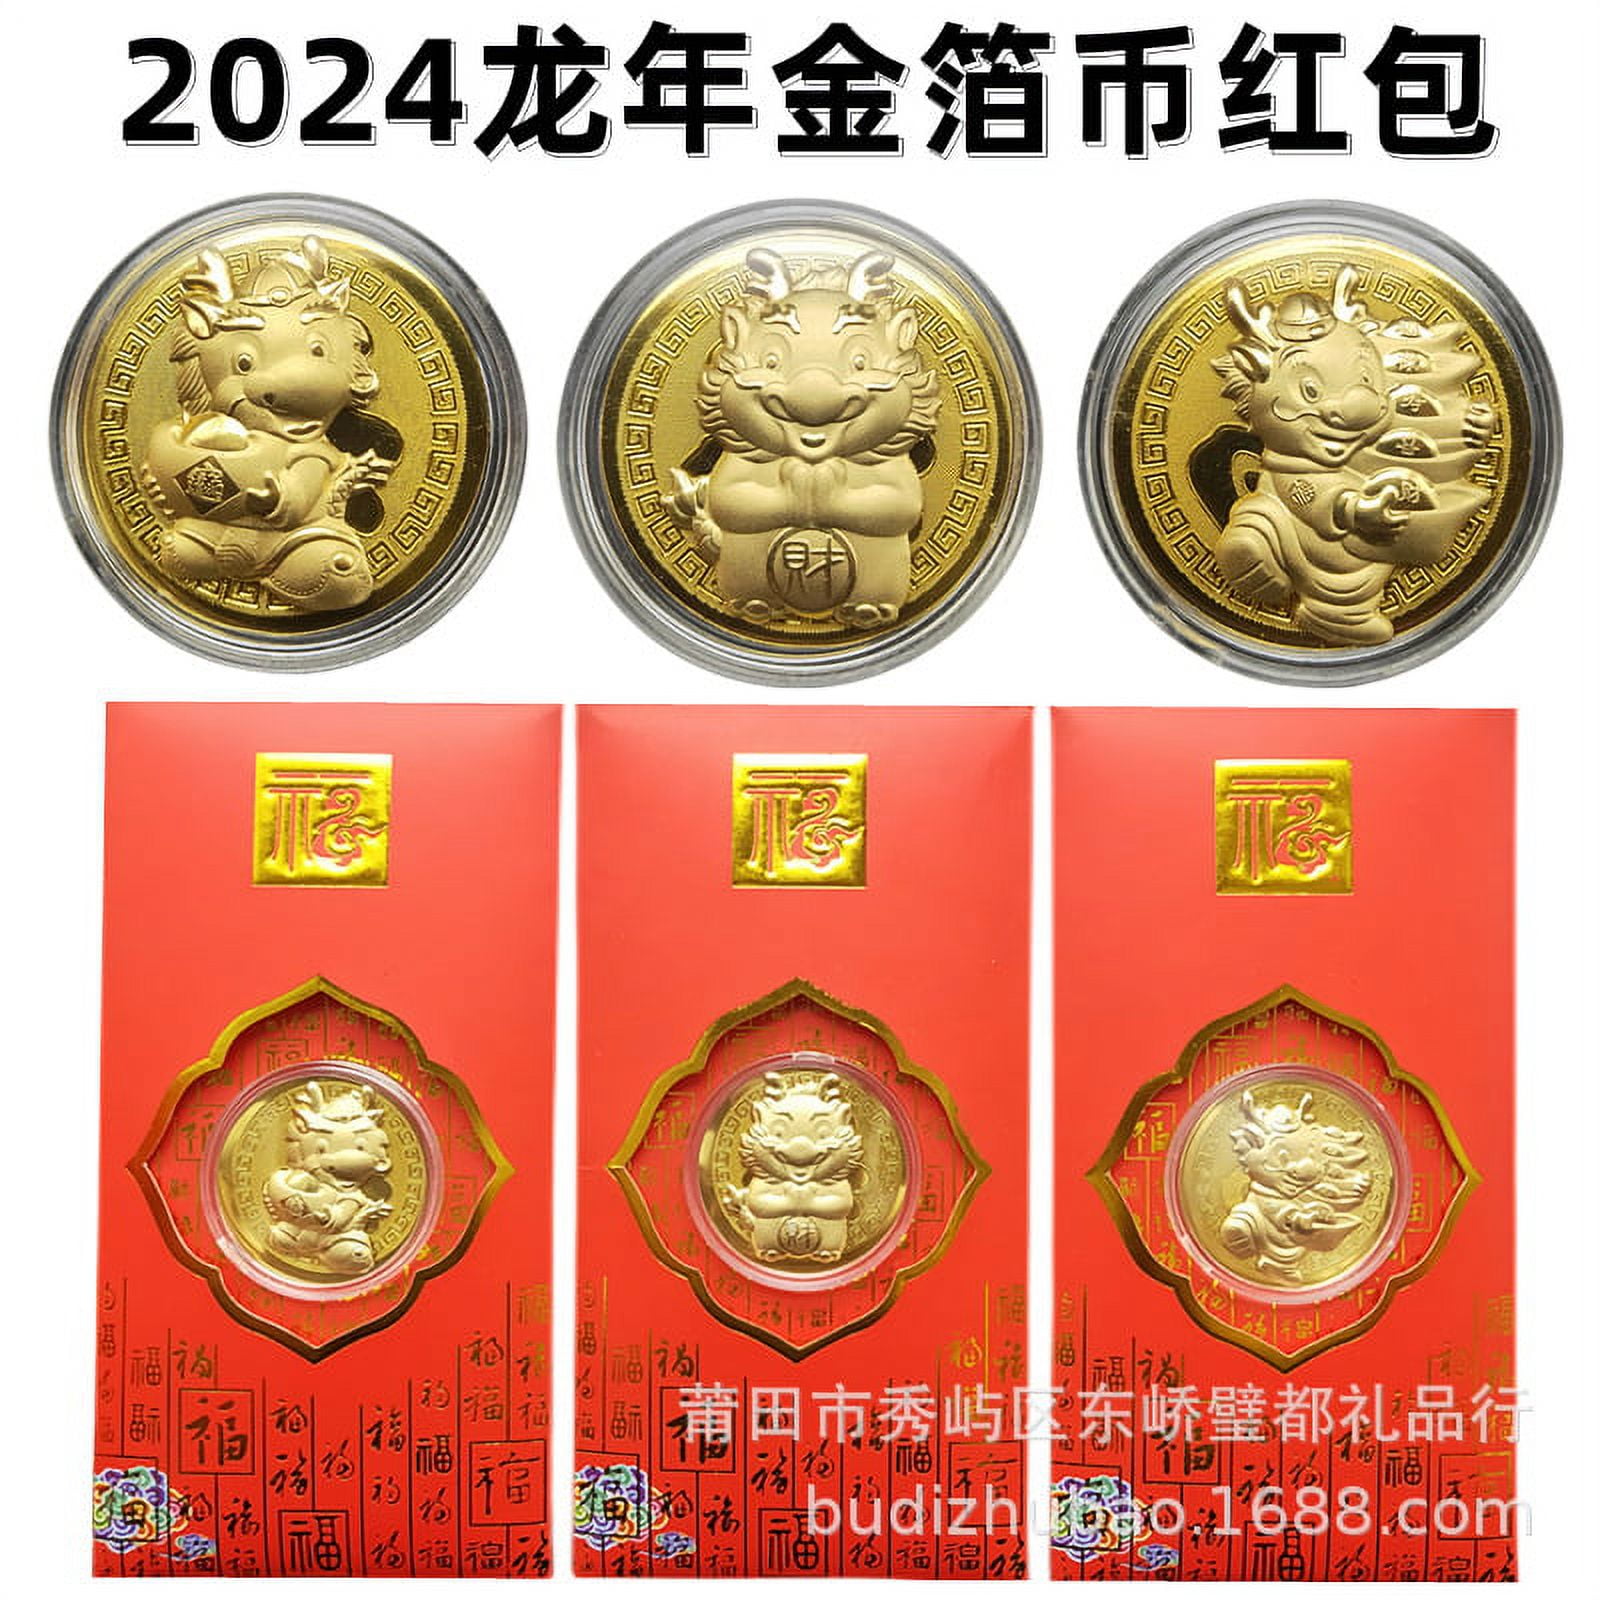 New 2023 Chase Bank Chinese New Year Red Envelopes - Lucky Pack Of 8!